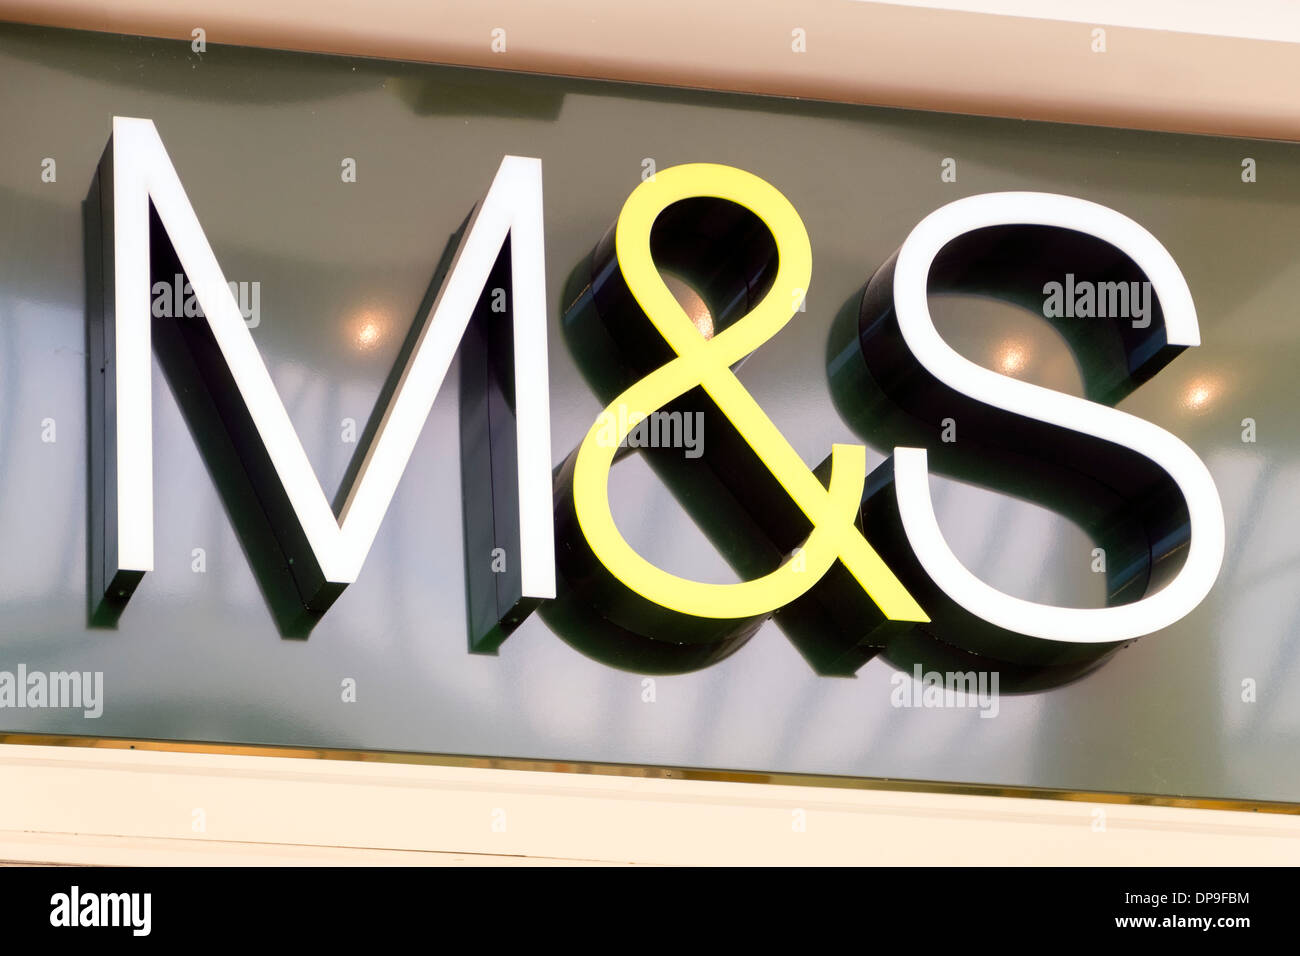 M&S store at Merry Hill, UK. Stock Photo